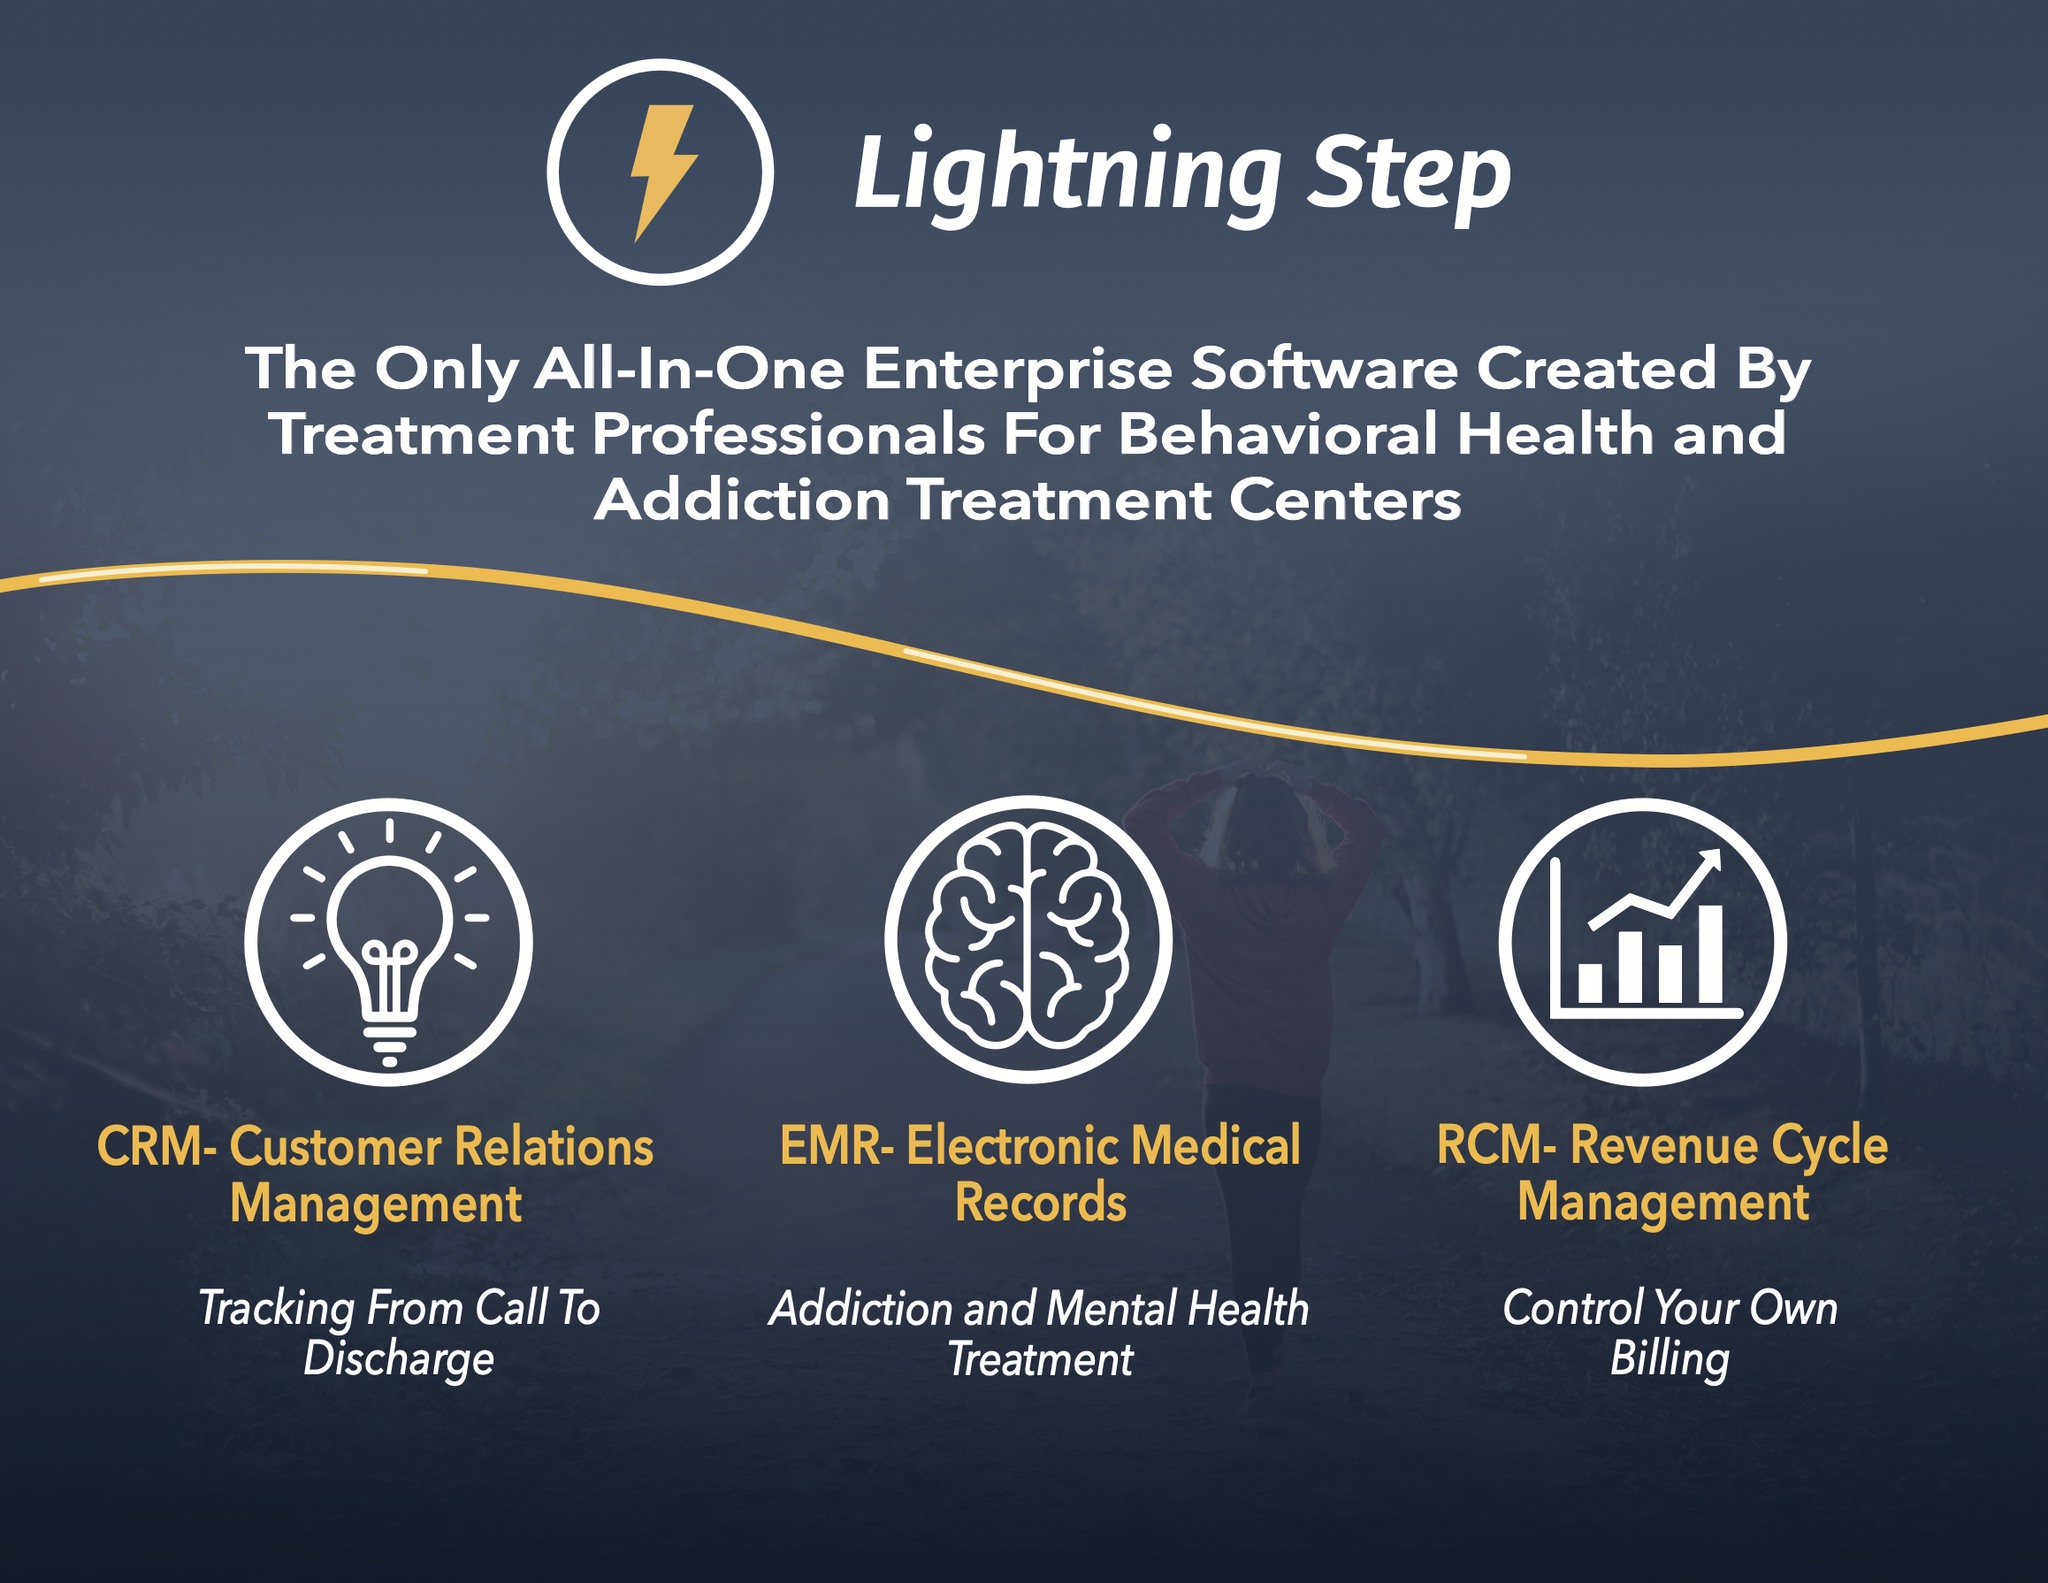 Integrate your CRM, EMR, and RCM systems and remove the cross-communication pain points of using multiple platforms by putting all the pieces into one single user-friendly system — Lightning Step.